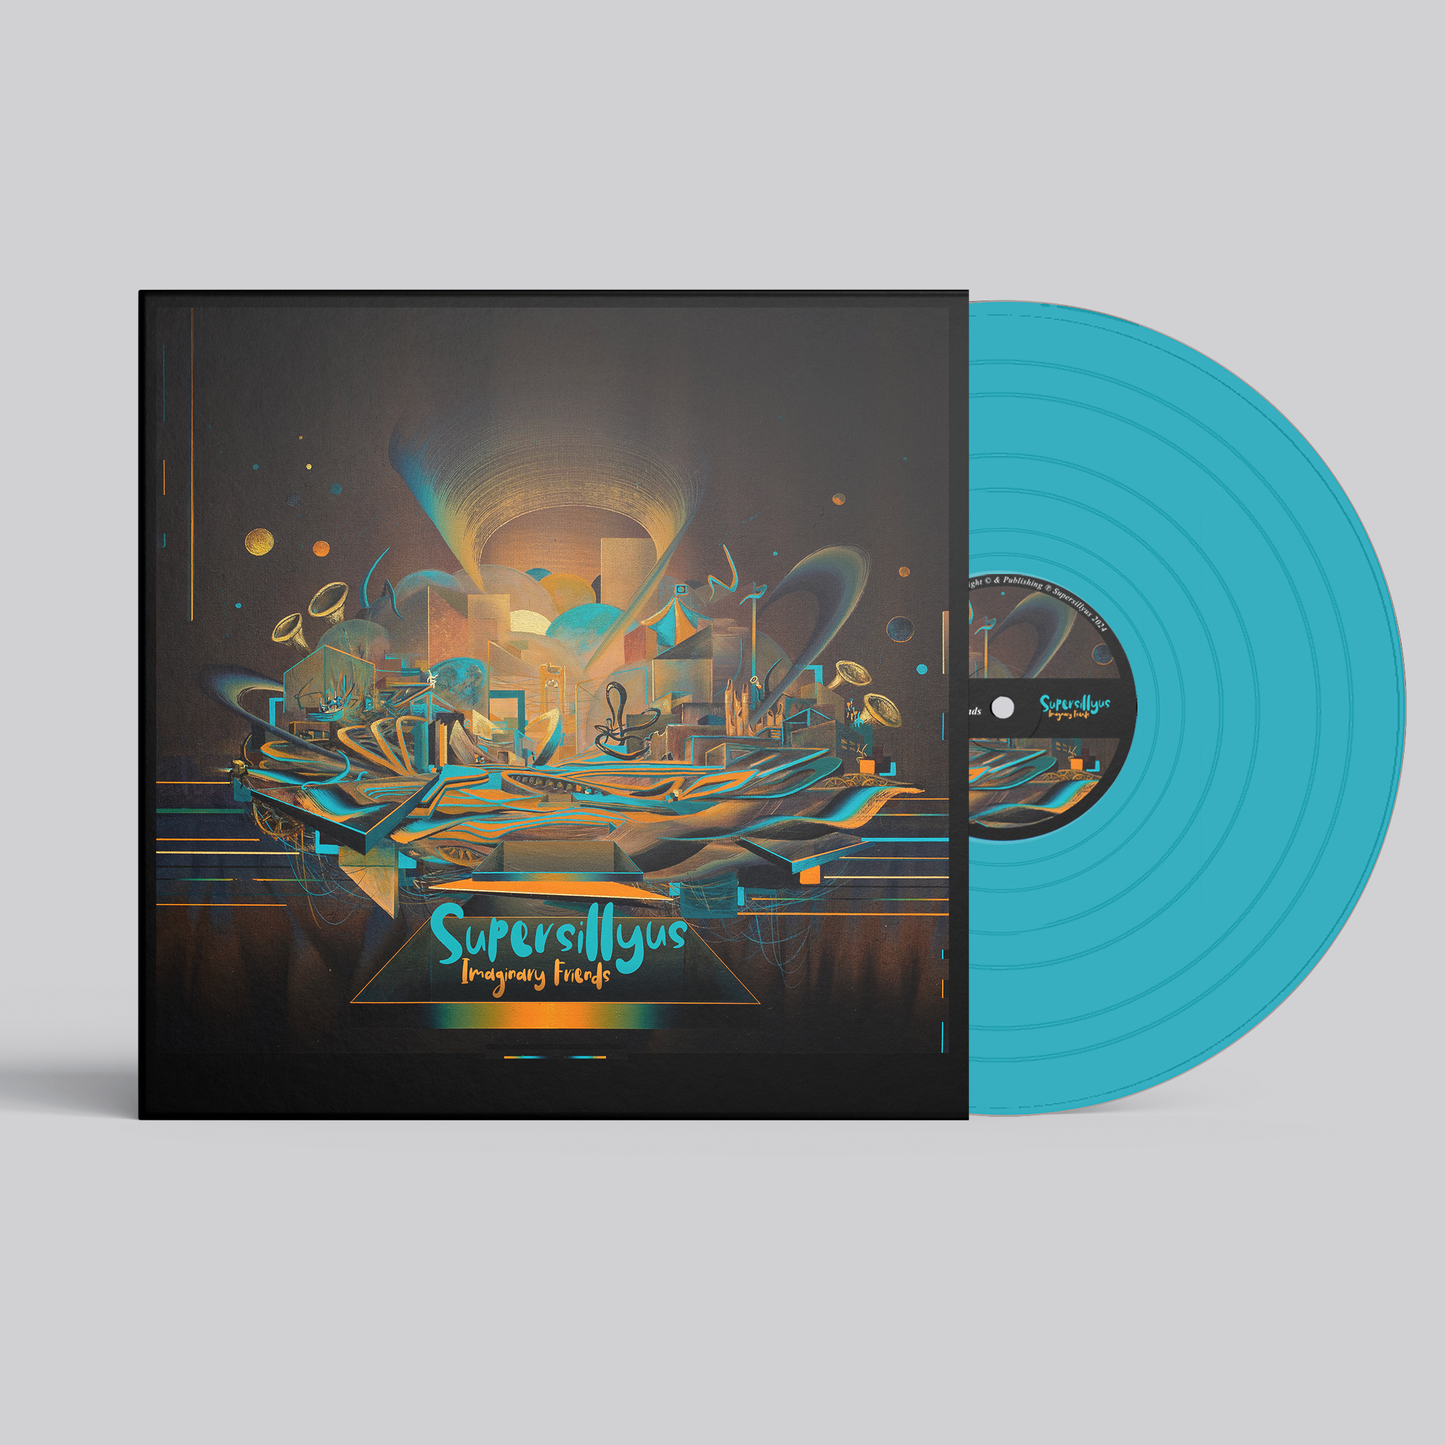 Supersillyus - Imaginary Friends Limited Edition 12" Teal Vinyl Pre-order